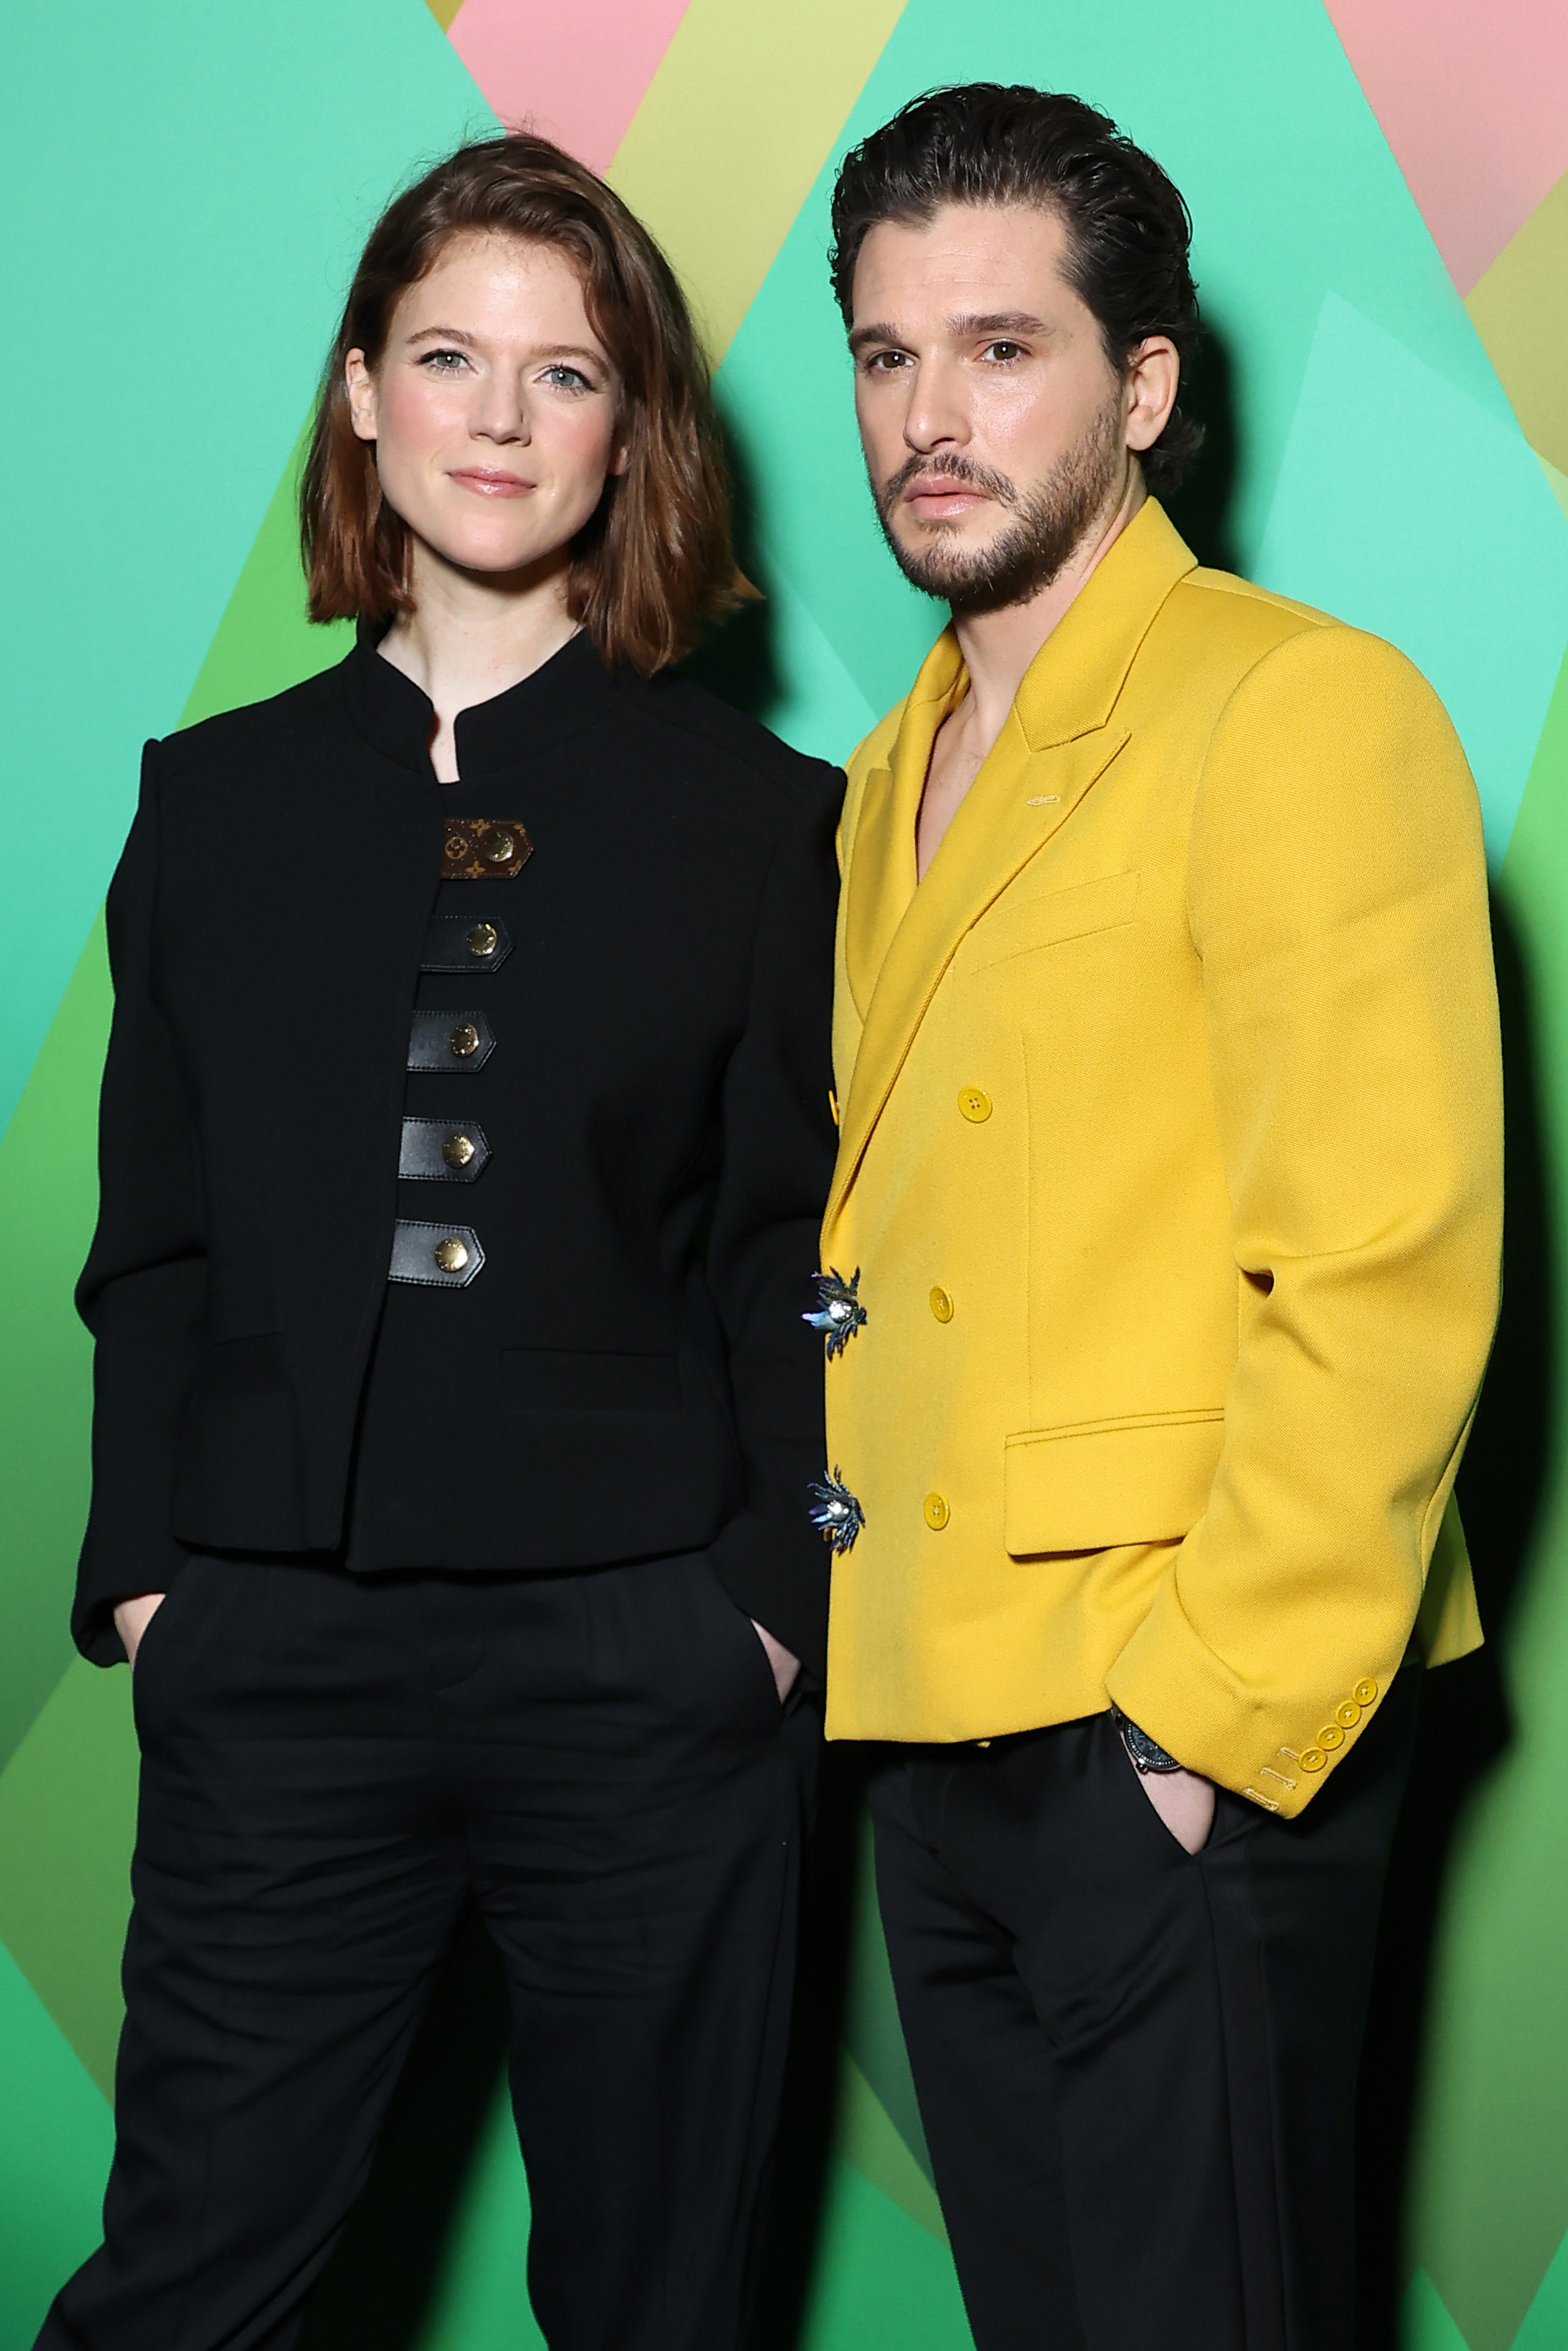 Two individuals posing, one in a black outfit with detailed buttons, the other in a bright yellow suit jacket